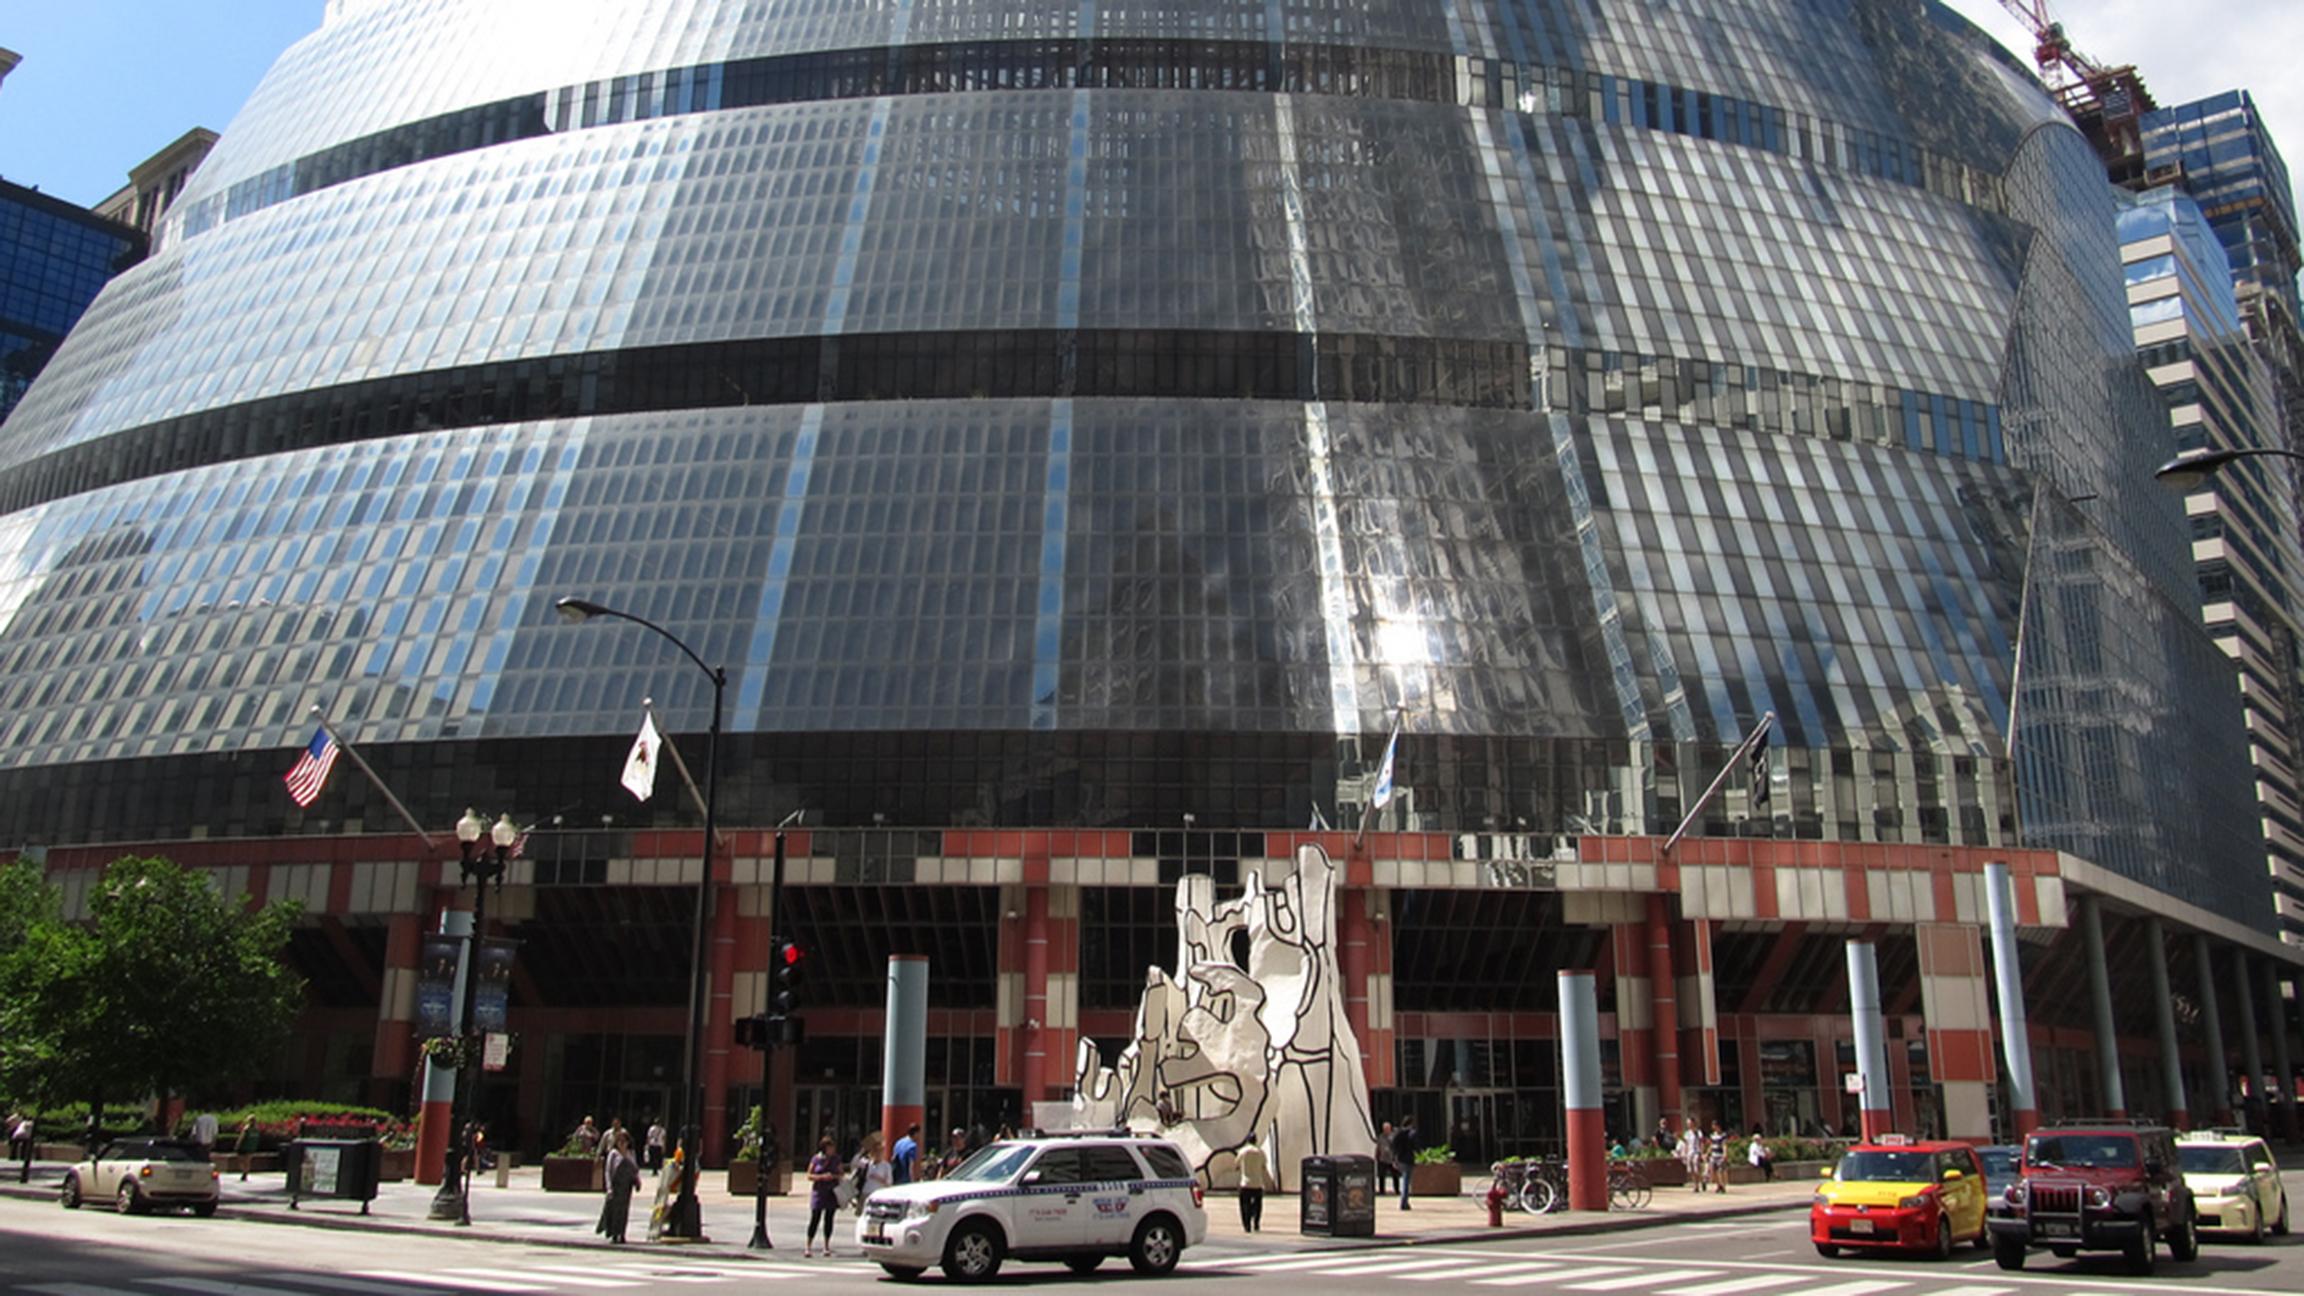 Senate Minority Leader Christine Radogno and House Minority Leader Jim Durkin filed legislation that would direct future property tax receipts from a possible Thompson Center redevelopment to Chicago Public Schools. (Ken Lund / Flickr)